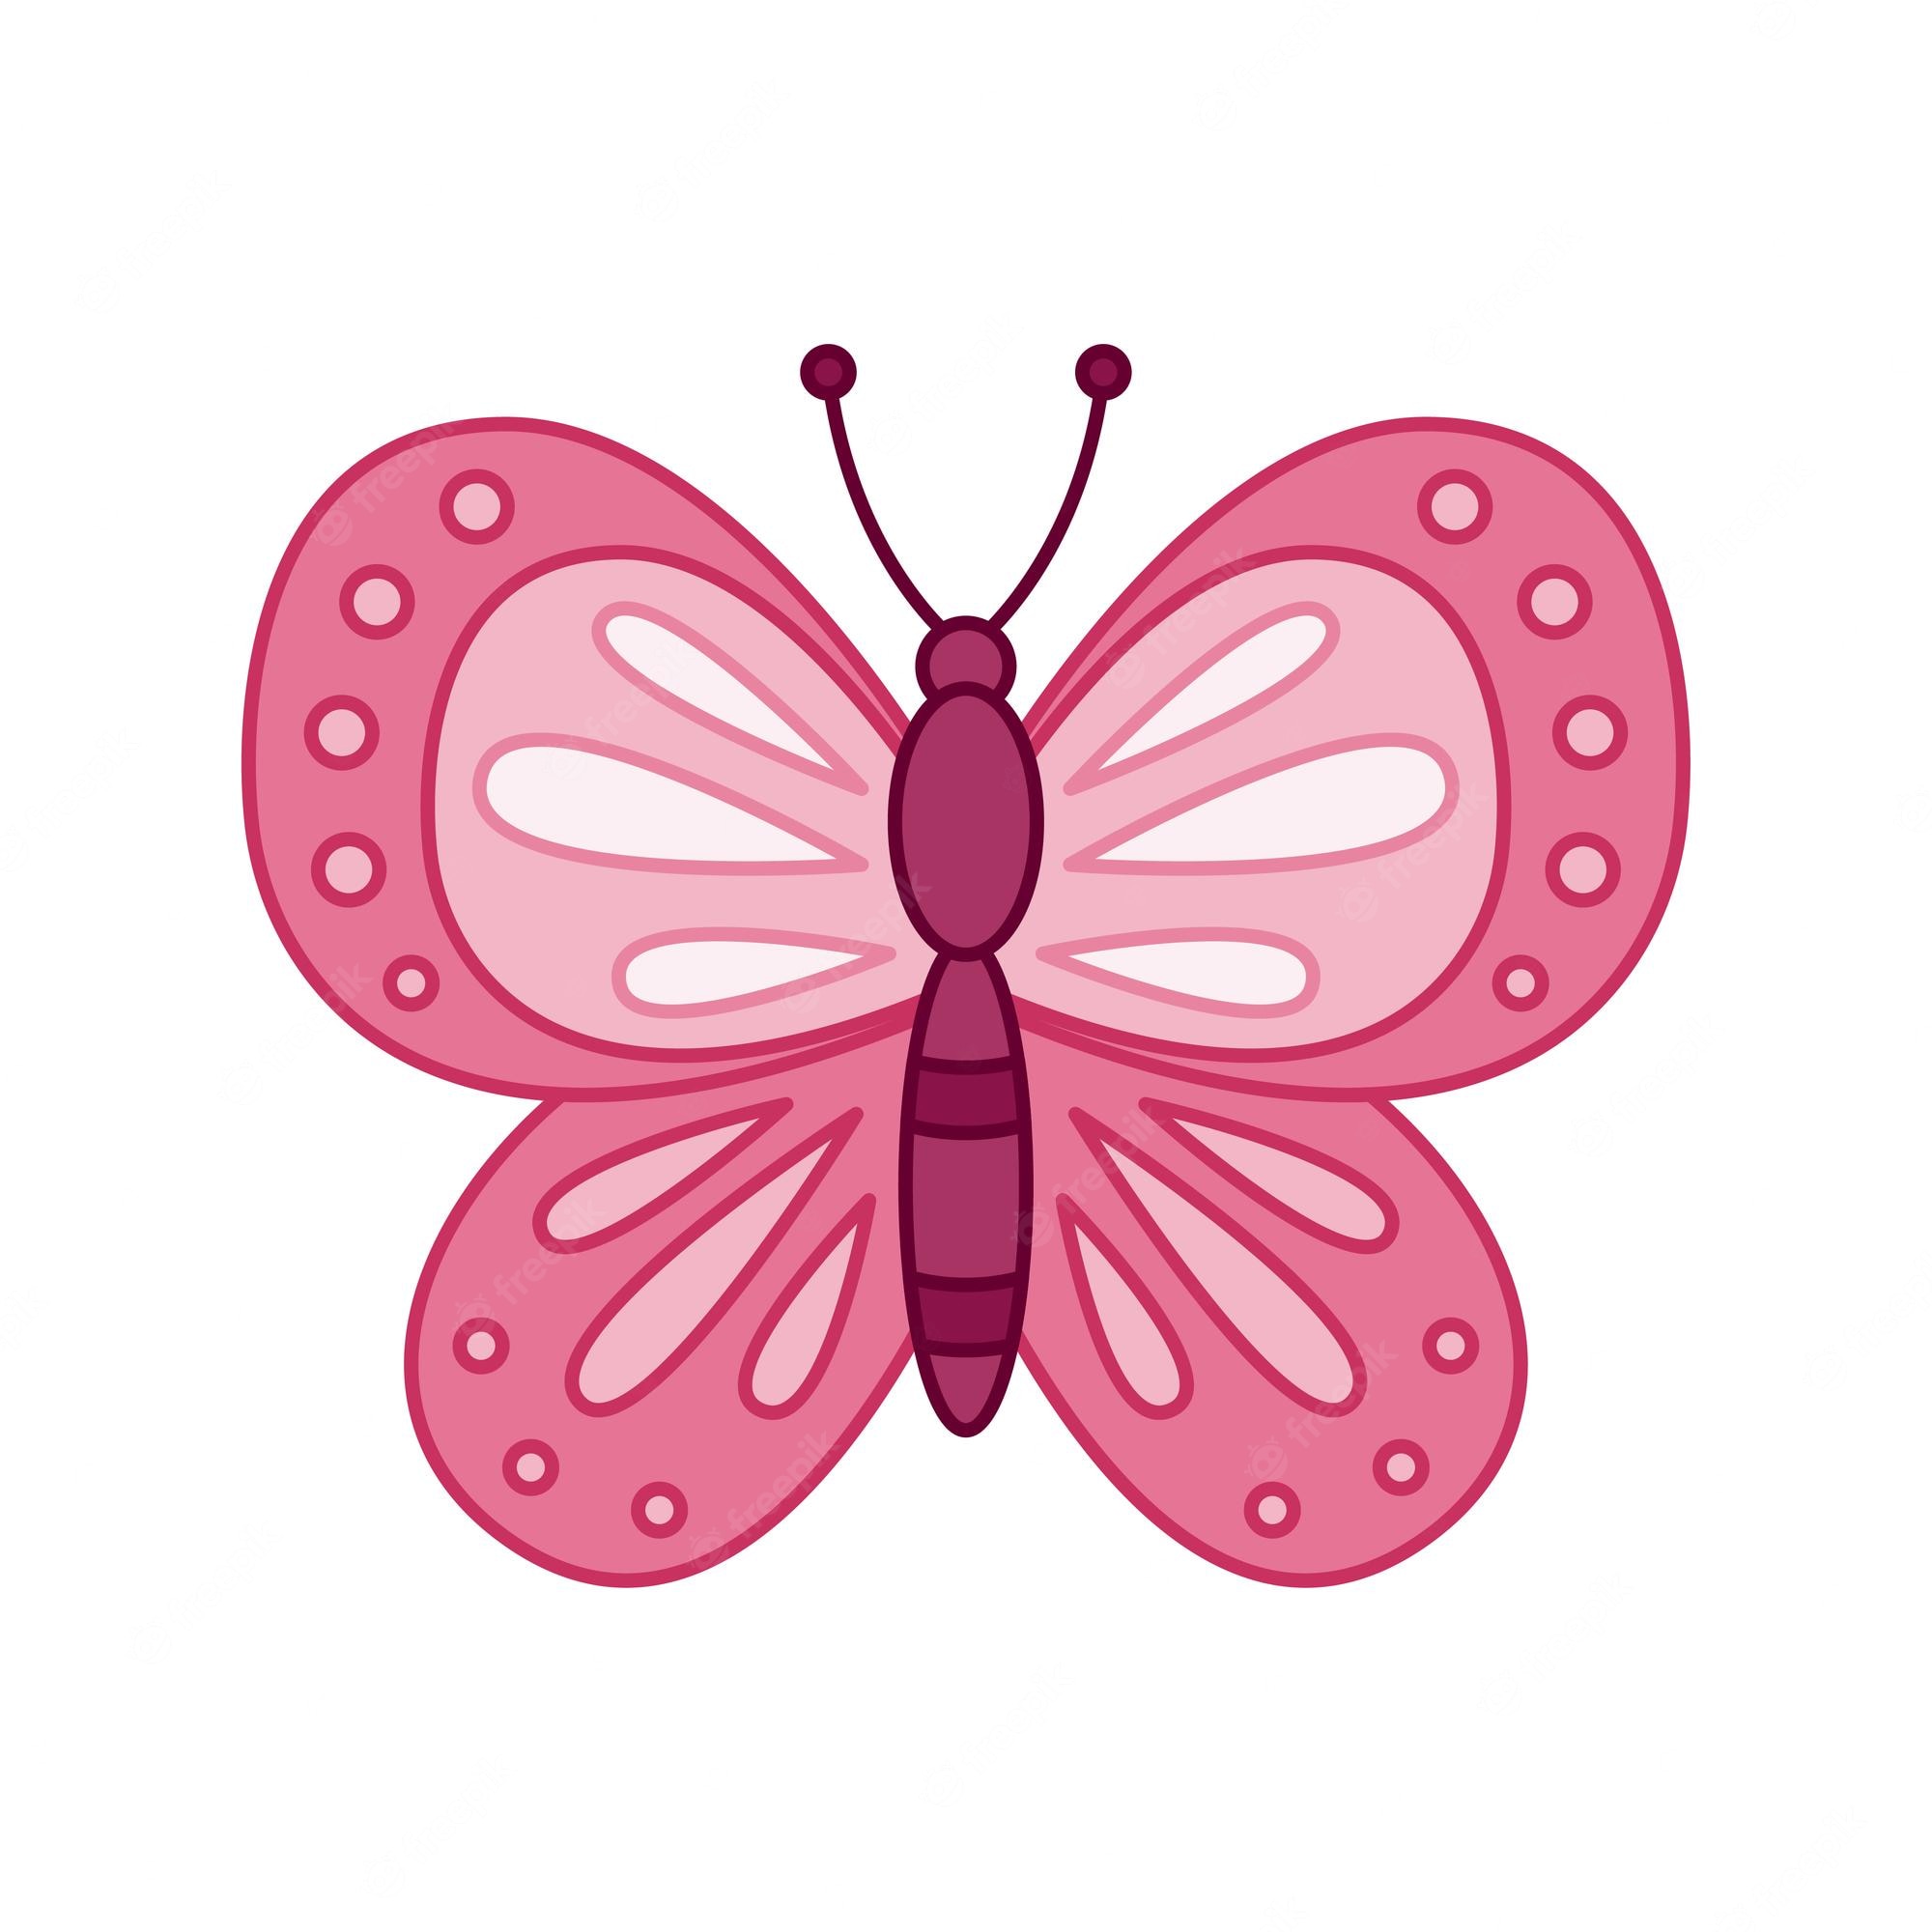 Butterfly character Image. Free Vectors, & PSD